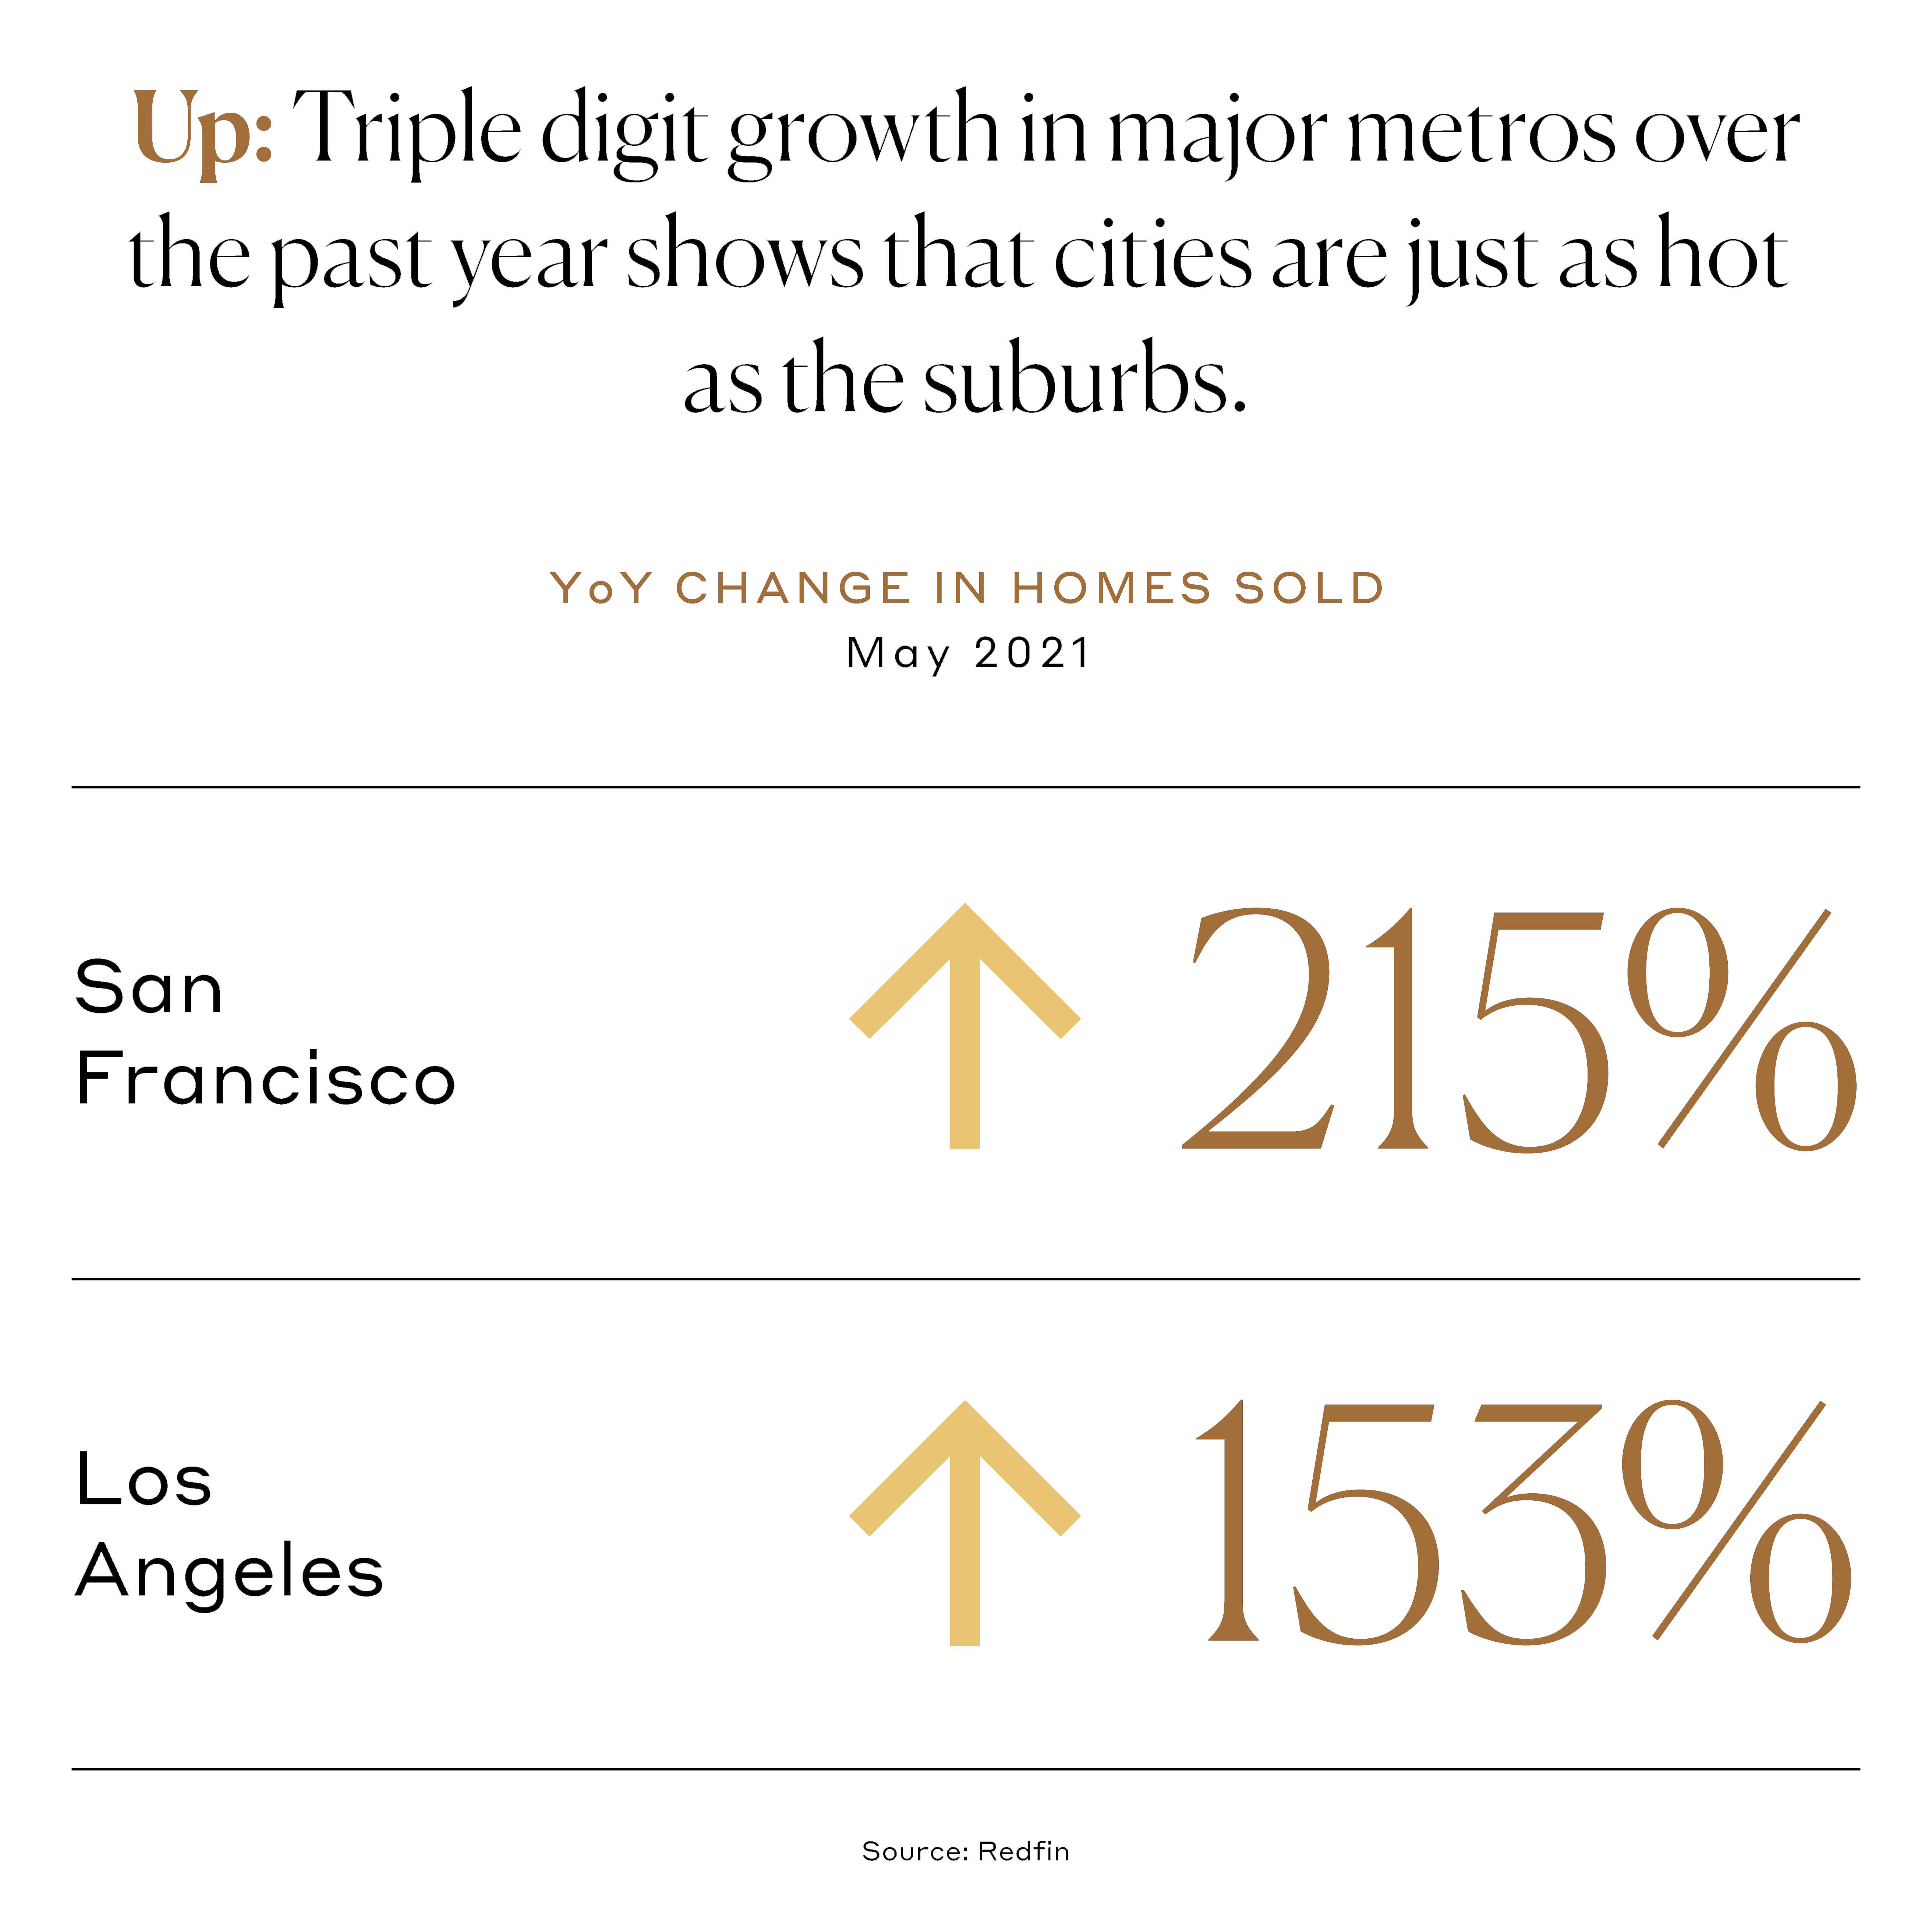 Up: Triple digit growth in major metros over the past year shows that cities are just as hot as the suburbs.